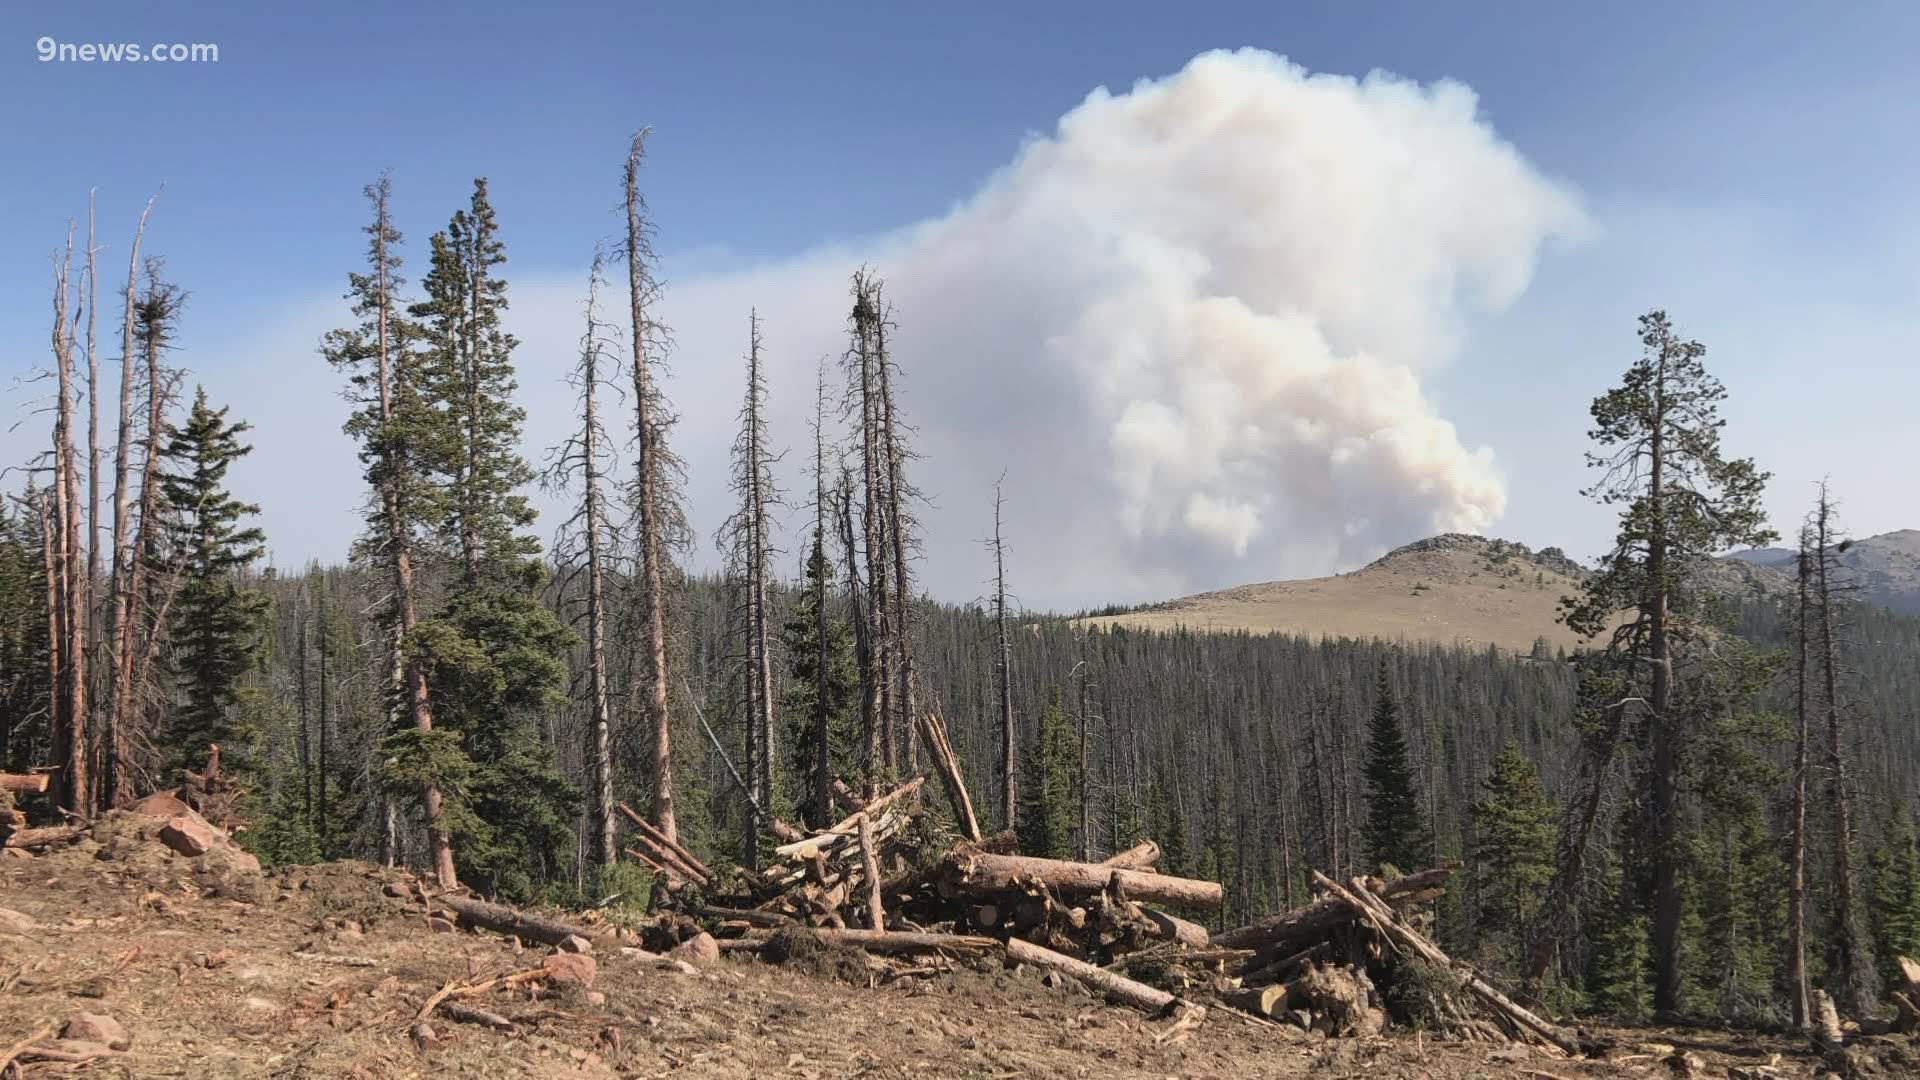 The wildfire in Larimer County has burned 126,251 acres as of Monday morning.